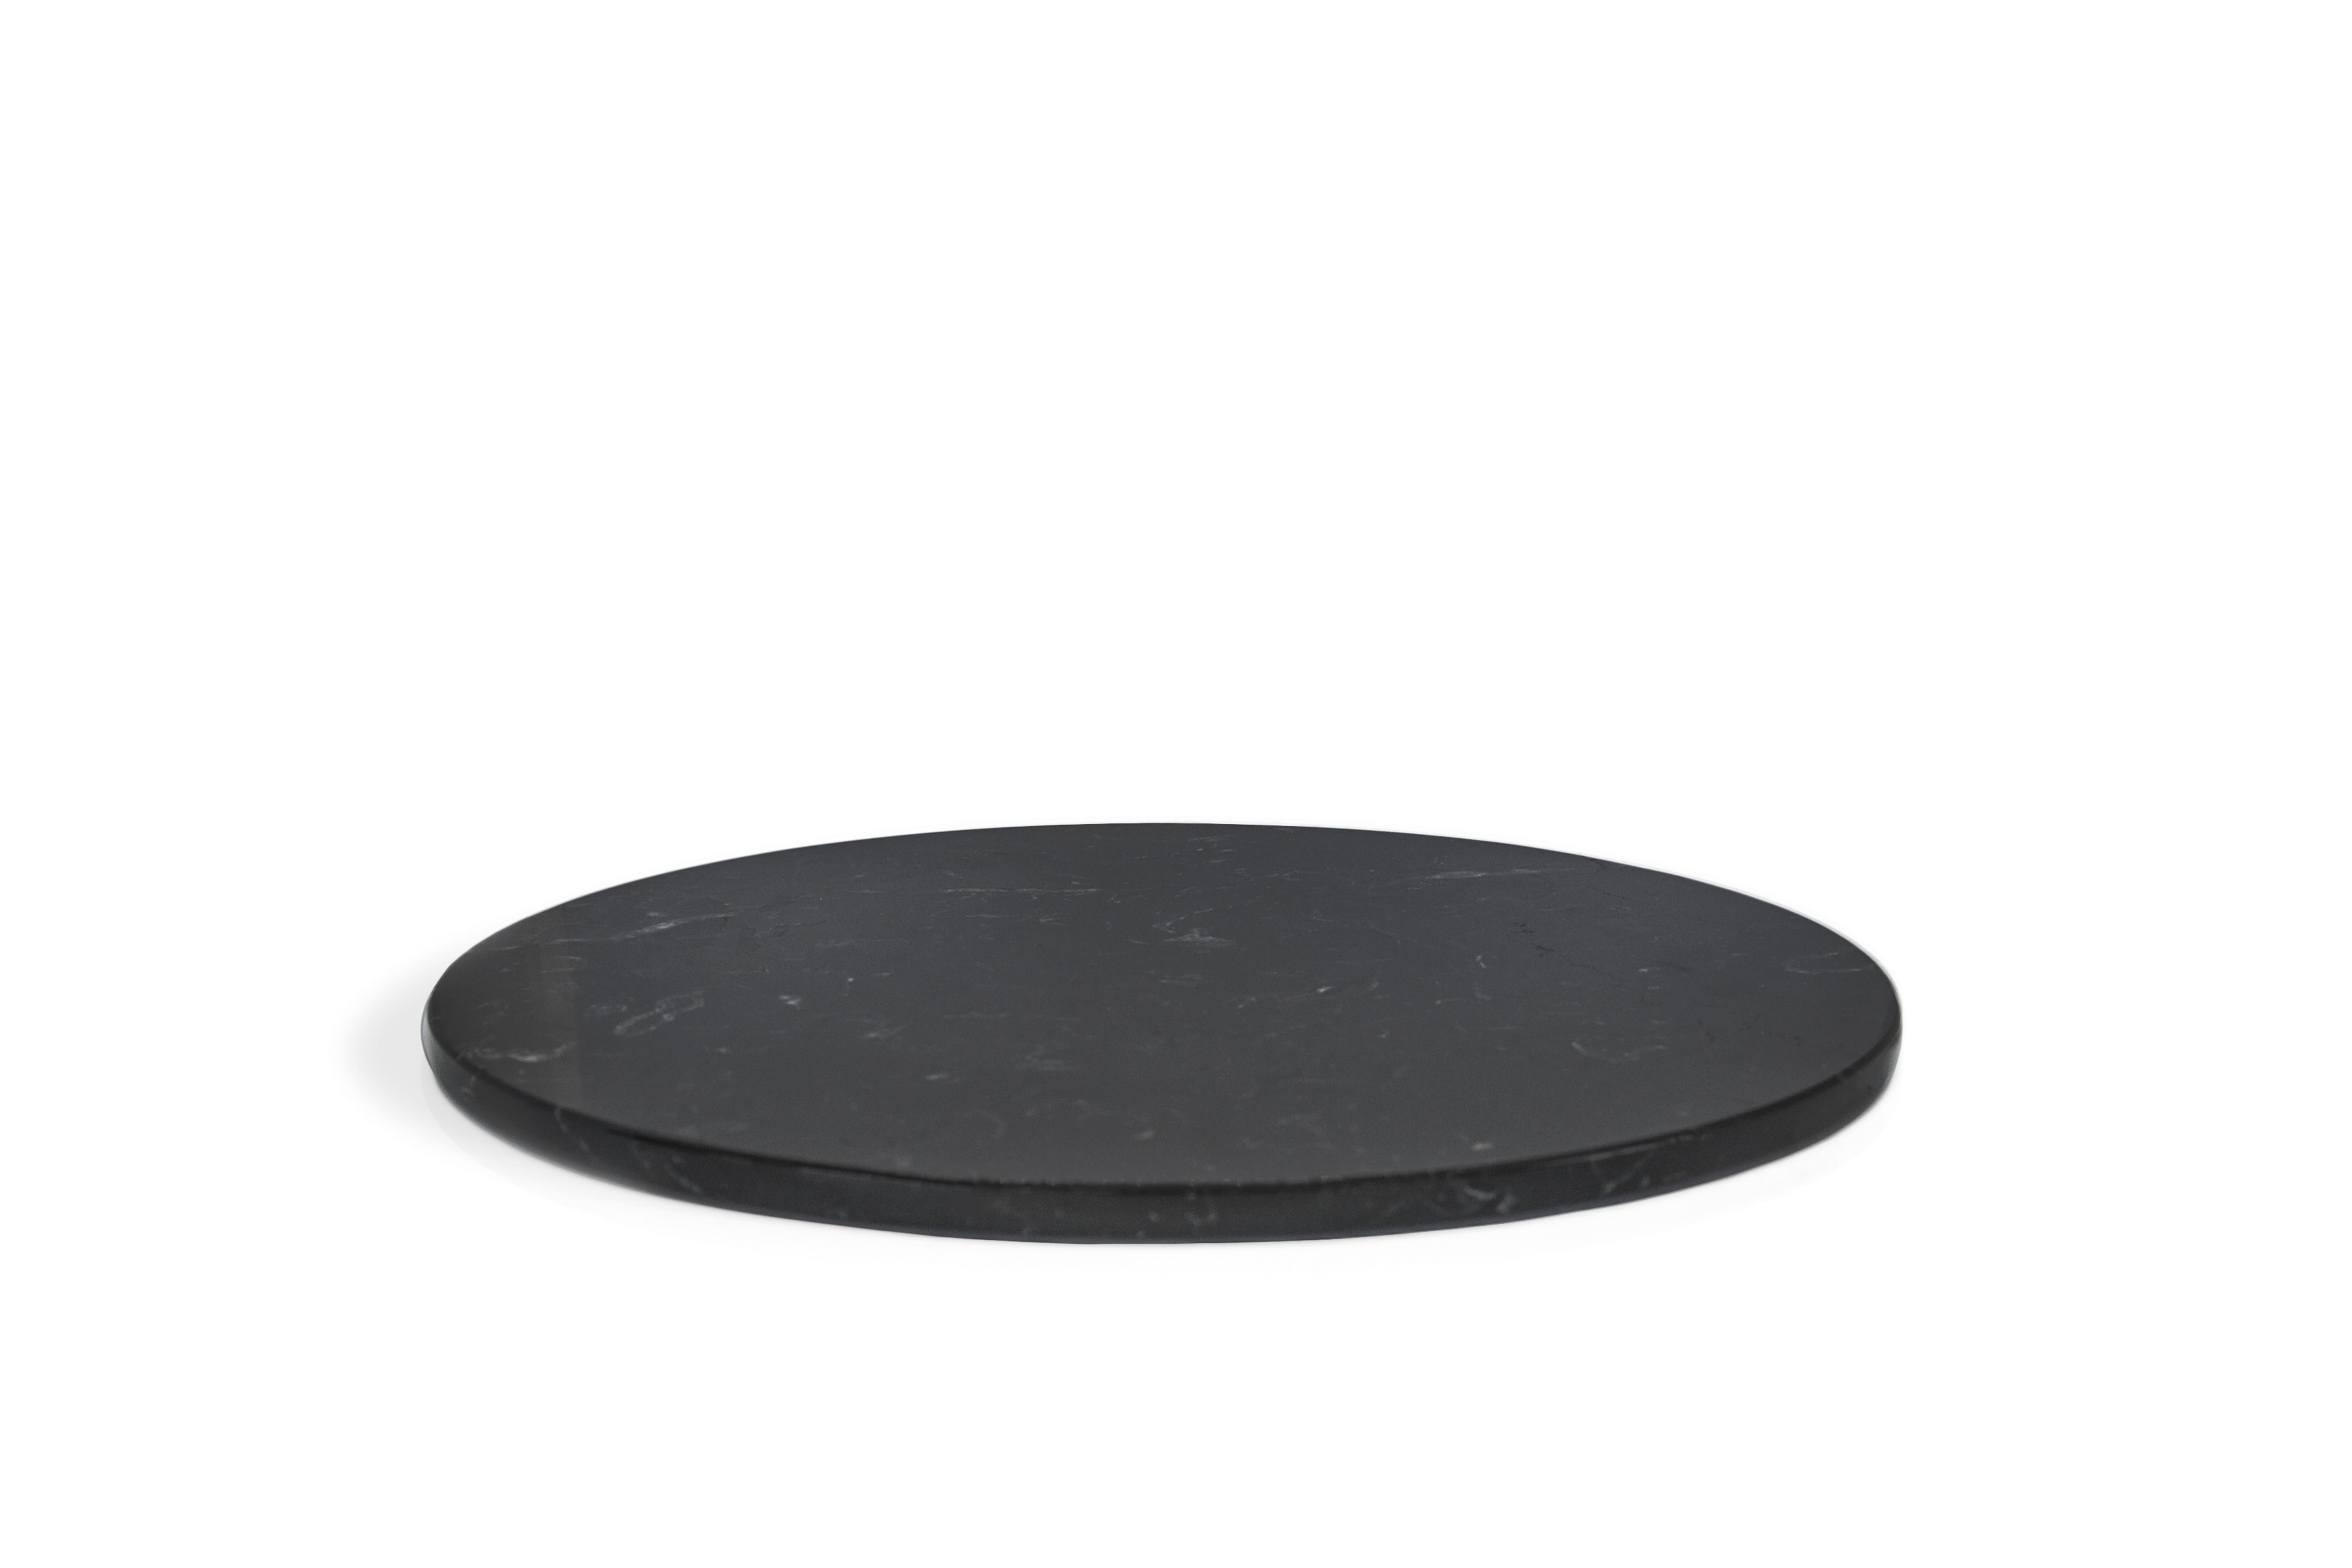 Rounded black Marquina marble cheese plate. Each piece is in a way unique (every marble block is different in veins and shades) and handmade by Italian artisans specialized over generations in processing marble. Slight variations in shape, color and